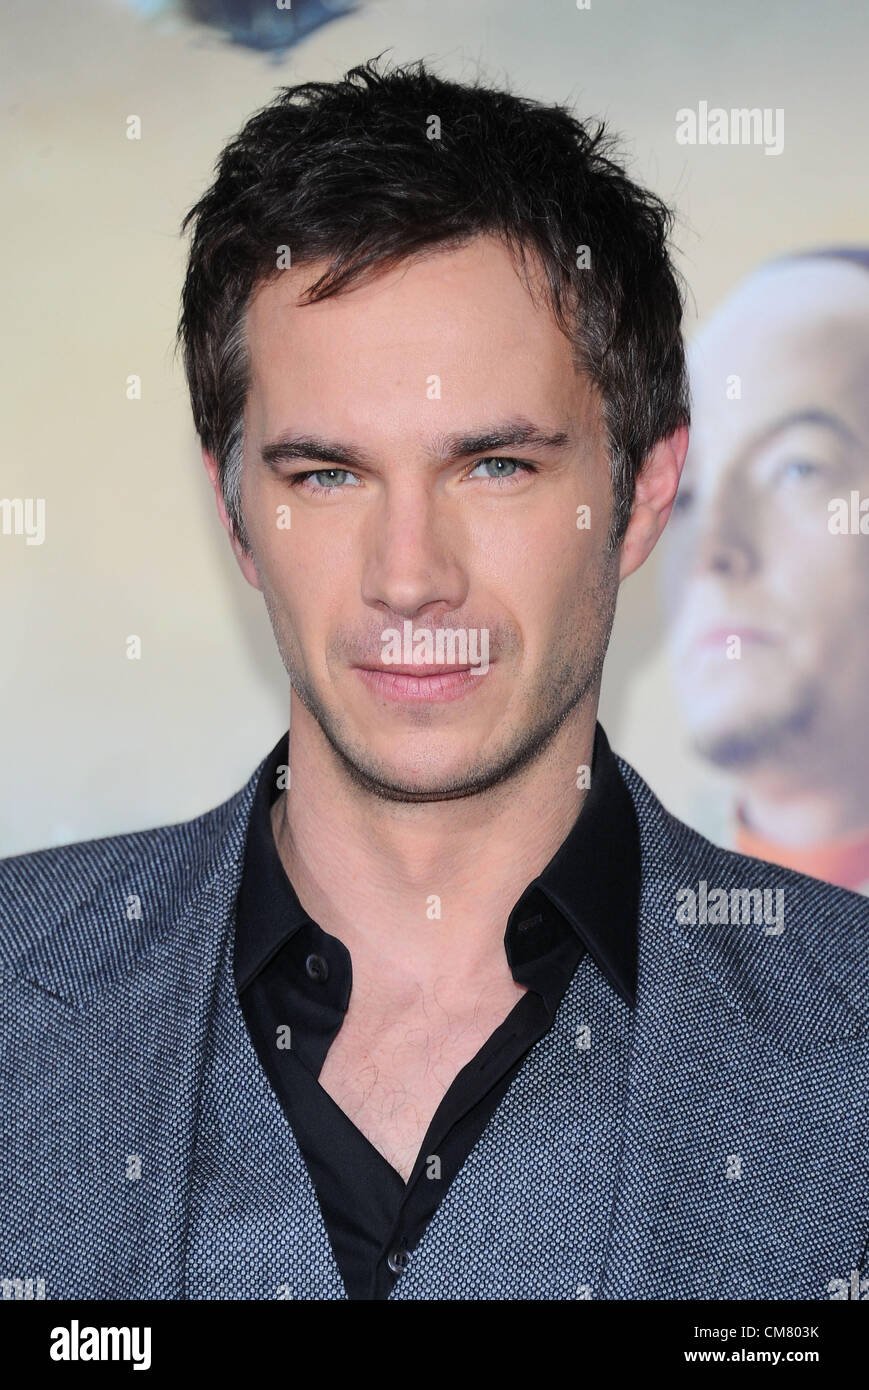 Los Angeles, USA. 24th October 2012. James D'Arcy arriving at the film premiere of 'Cloud Atlas' in Los Angeles on October 24th 2012 Stock Photo